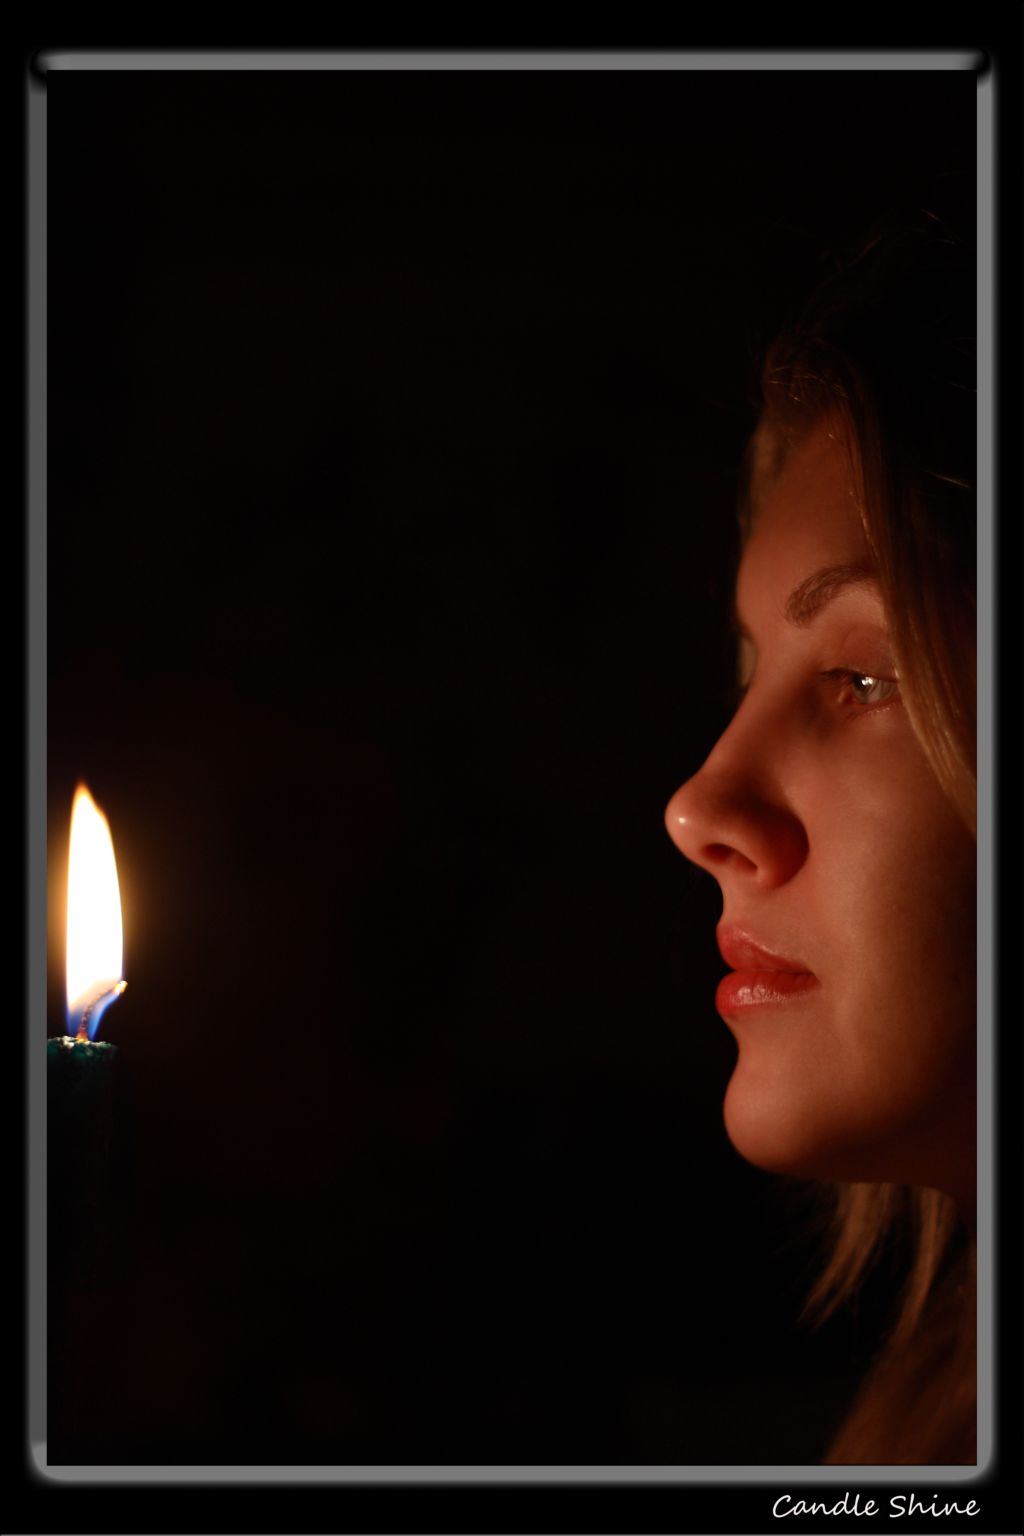 Candle Shine res.jpg